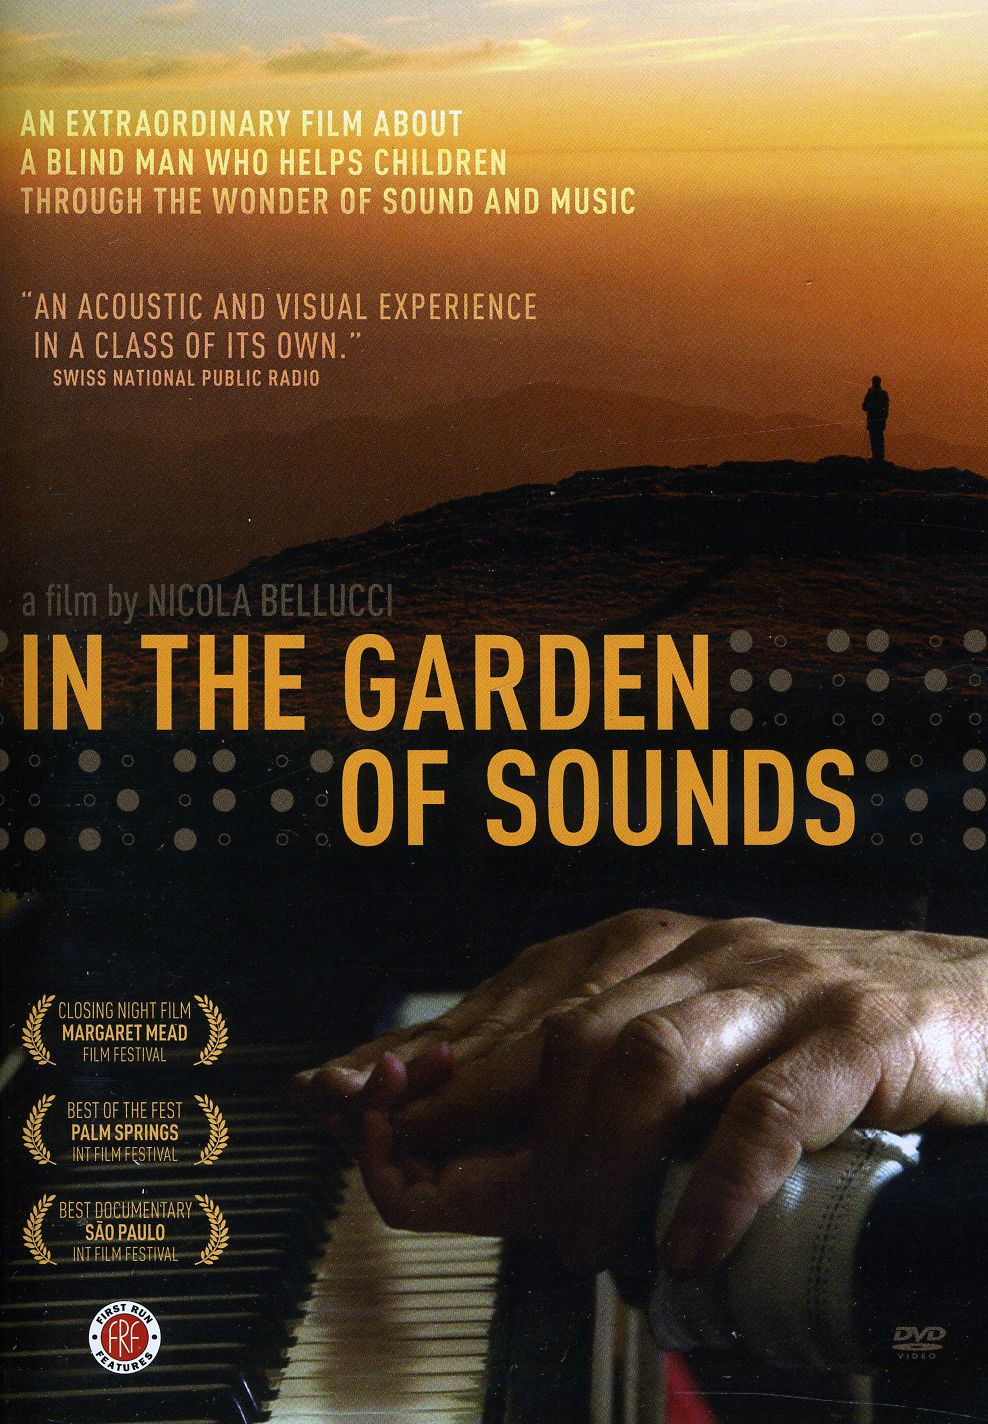 IN THE GARDEN OF SOUNDS / (SUB WS)